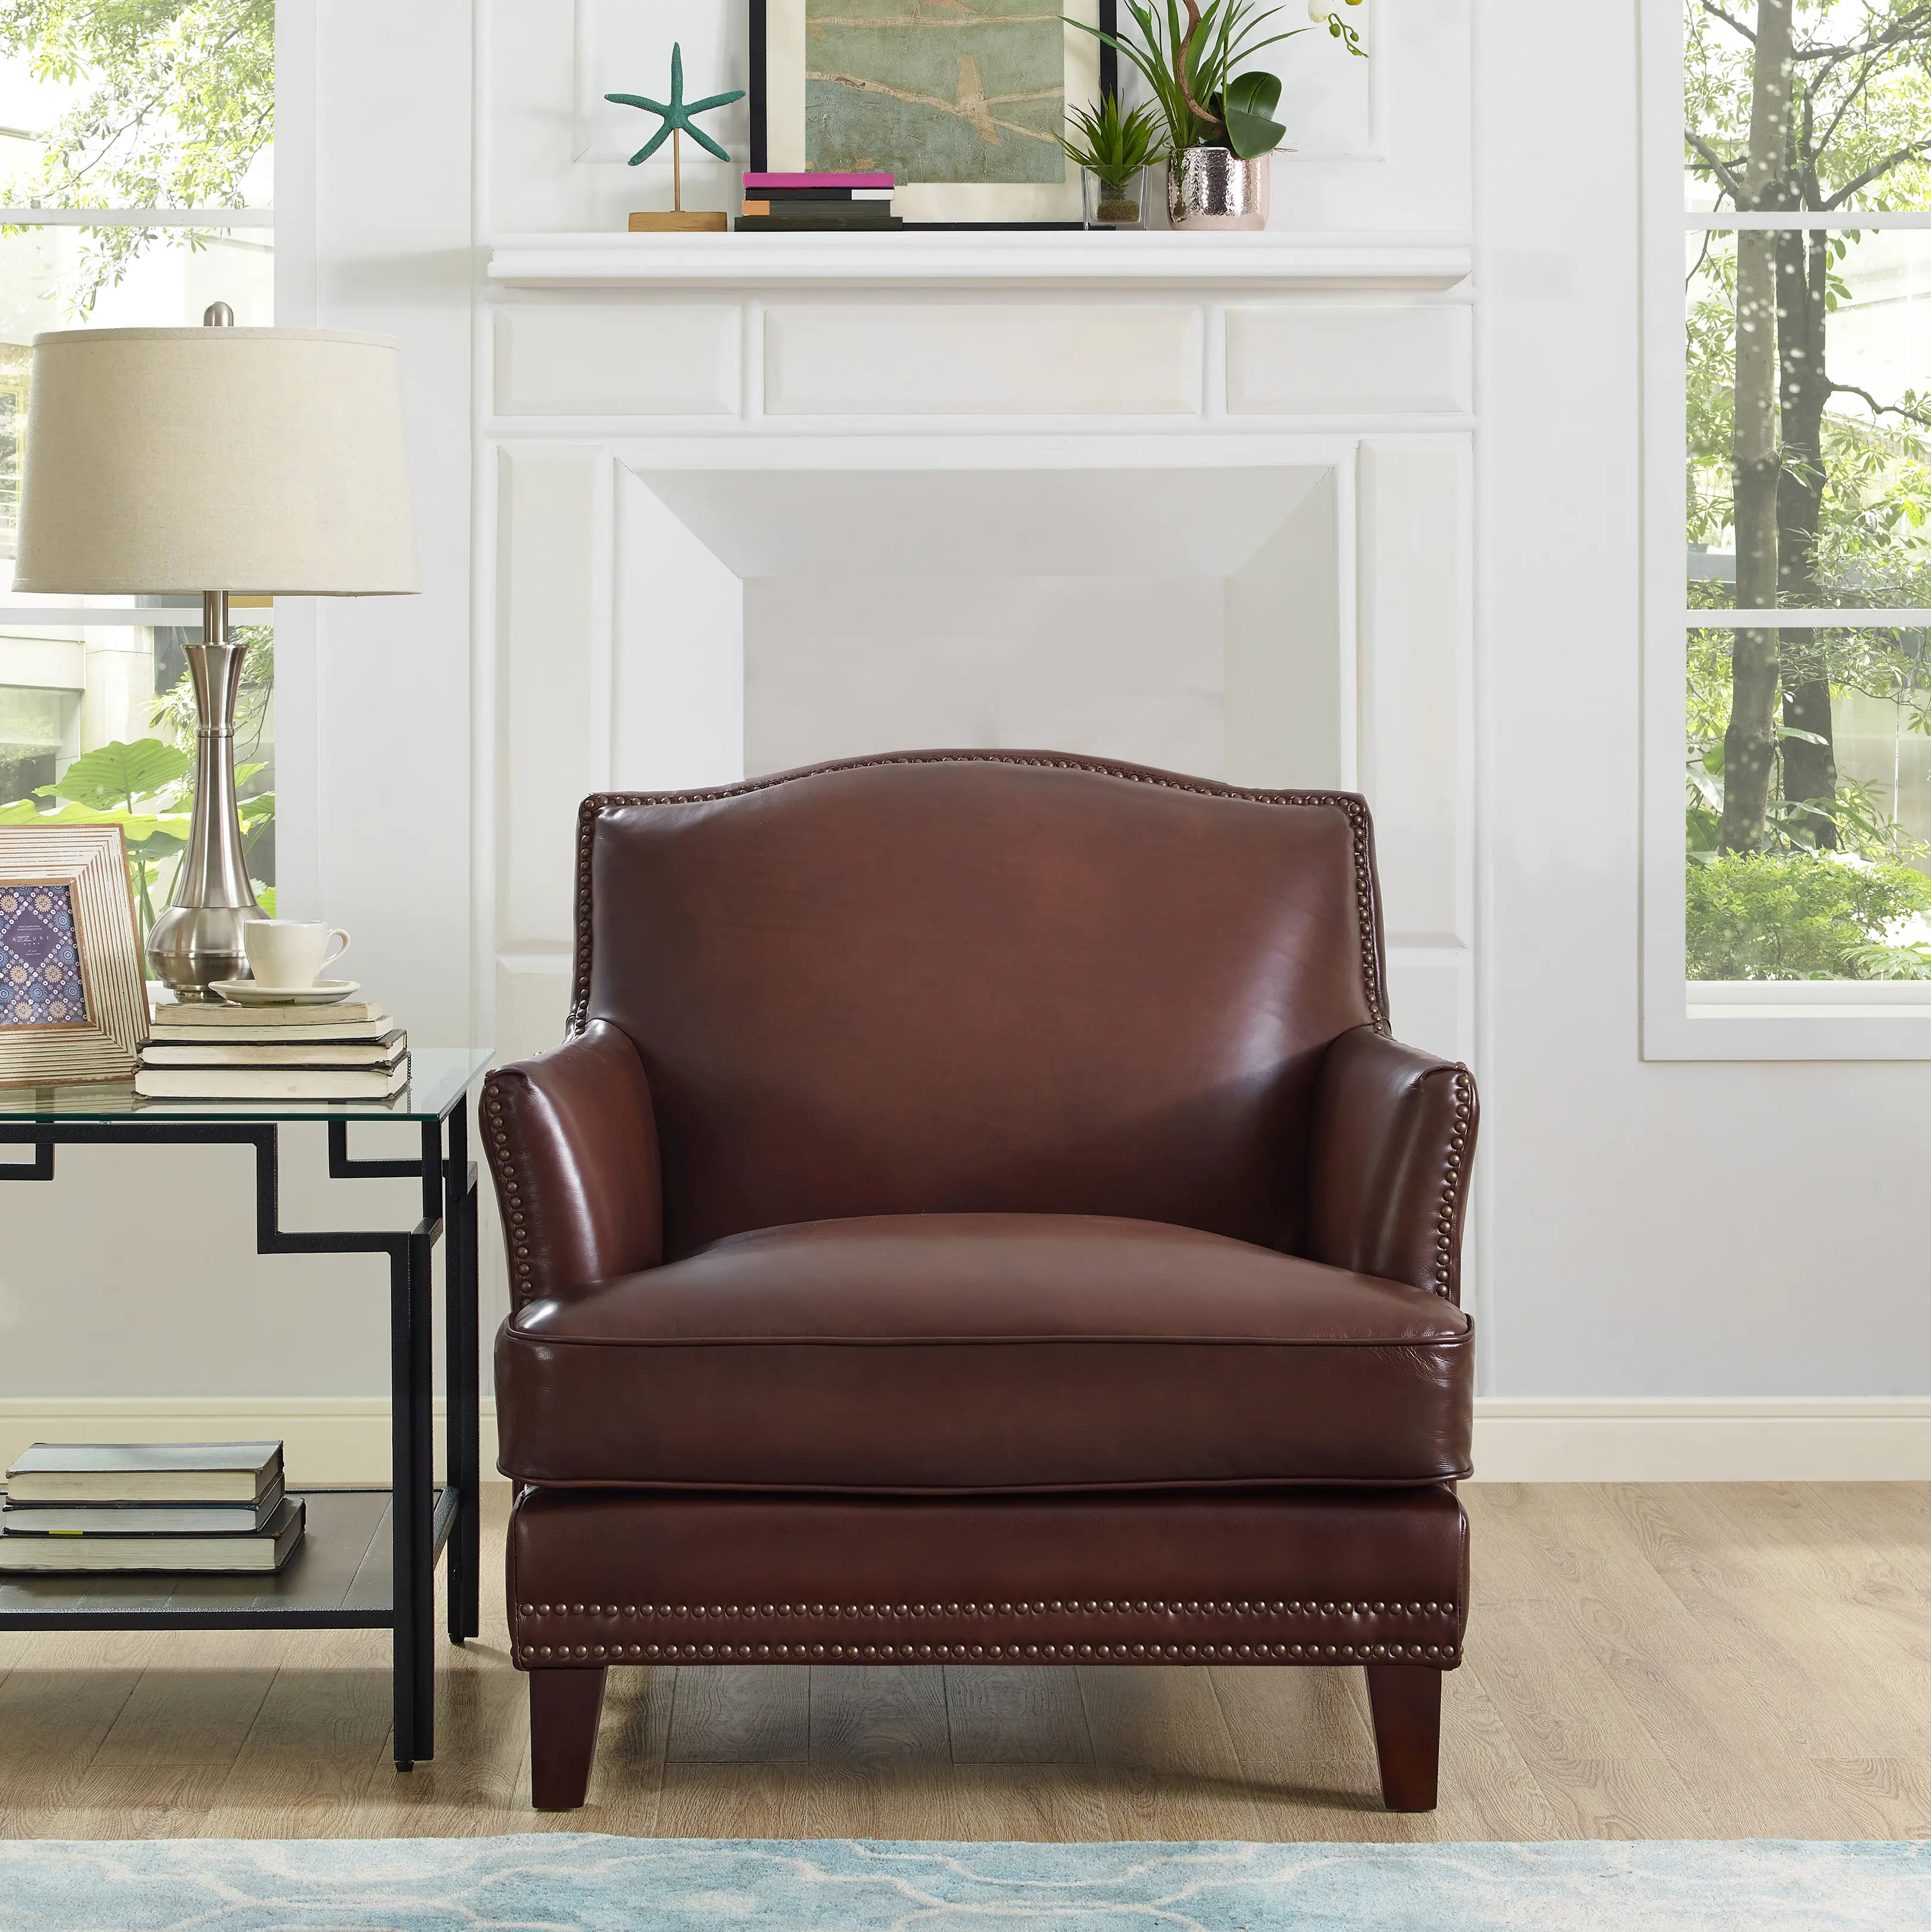 Manchester Brown Leather Chair